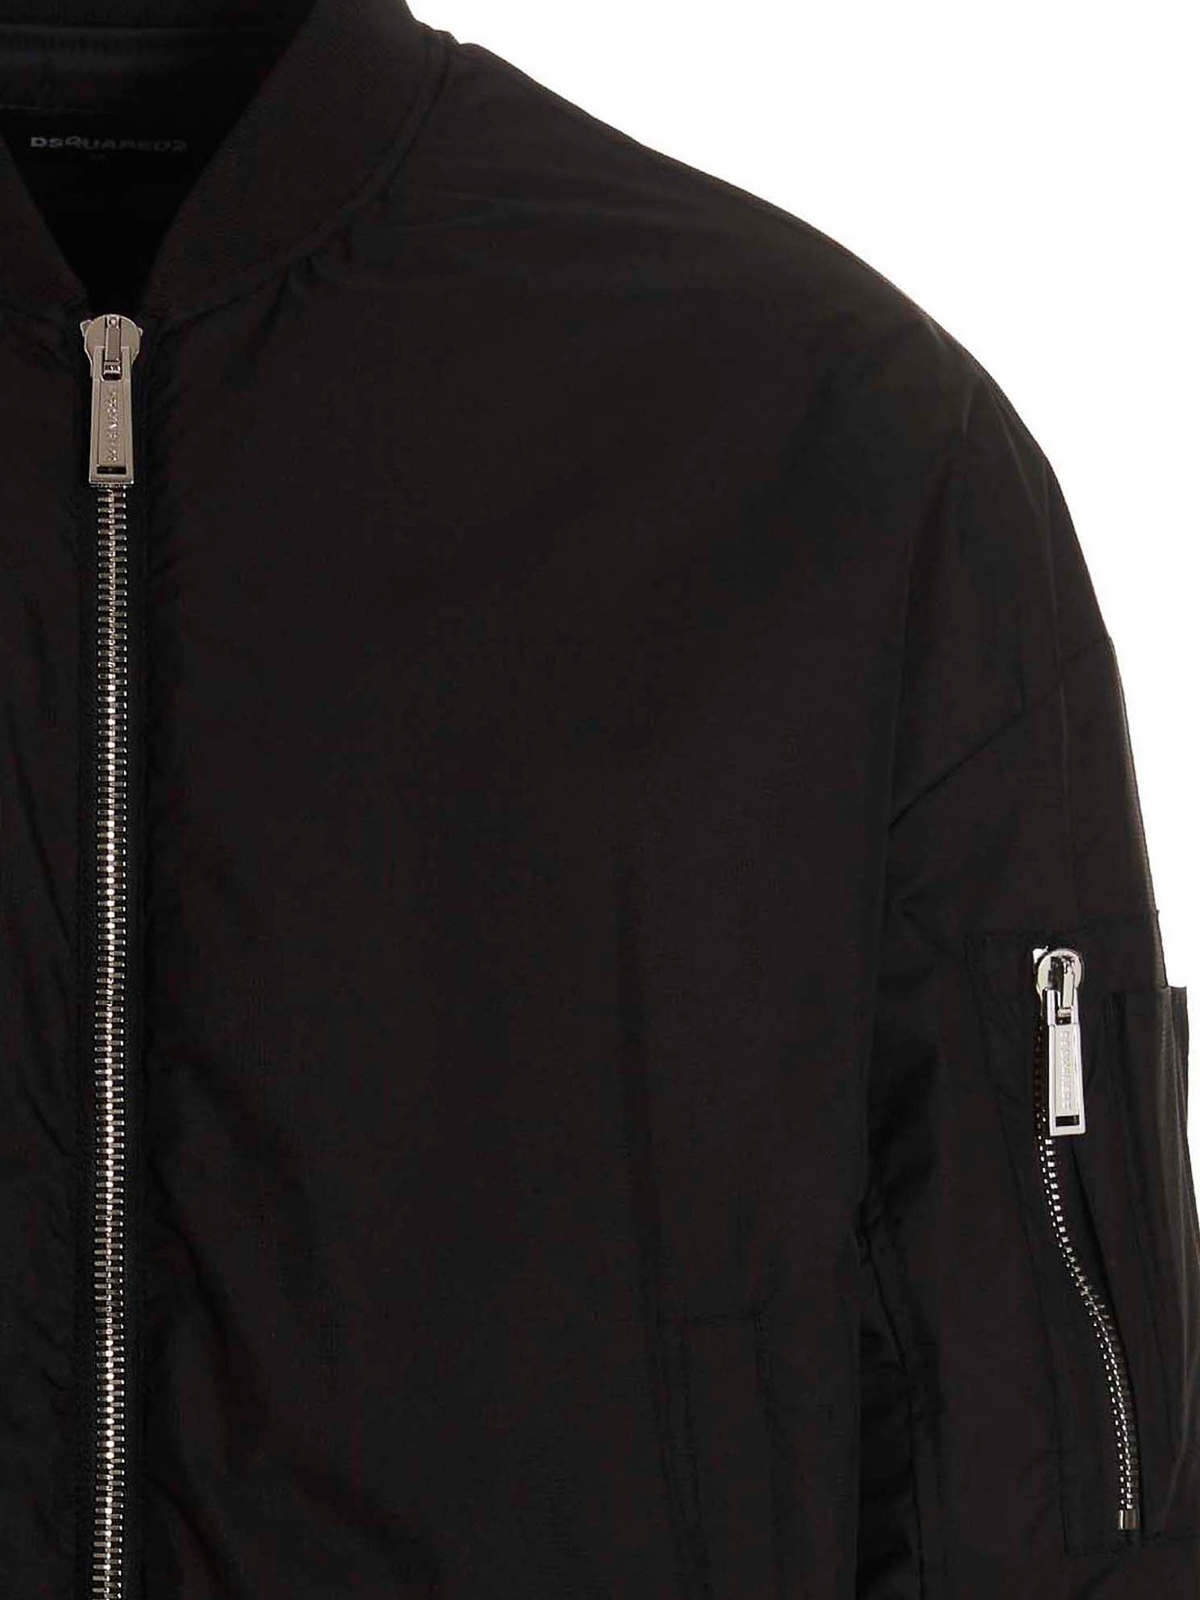 Shop Dsquared2 D2 On The Wave Bomber In Black